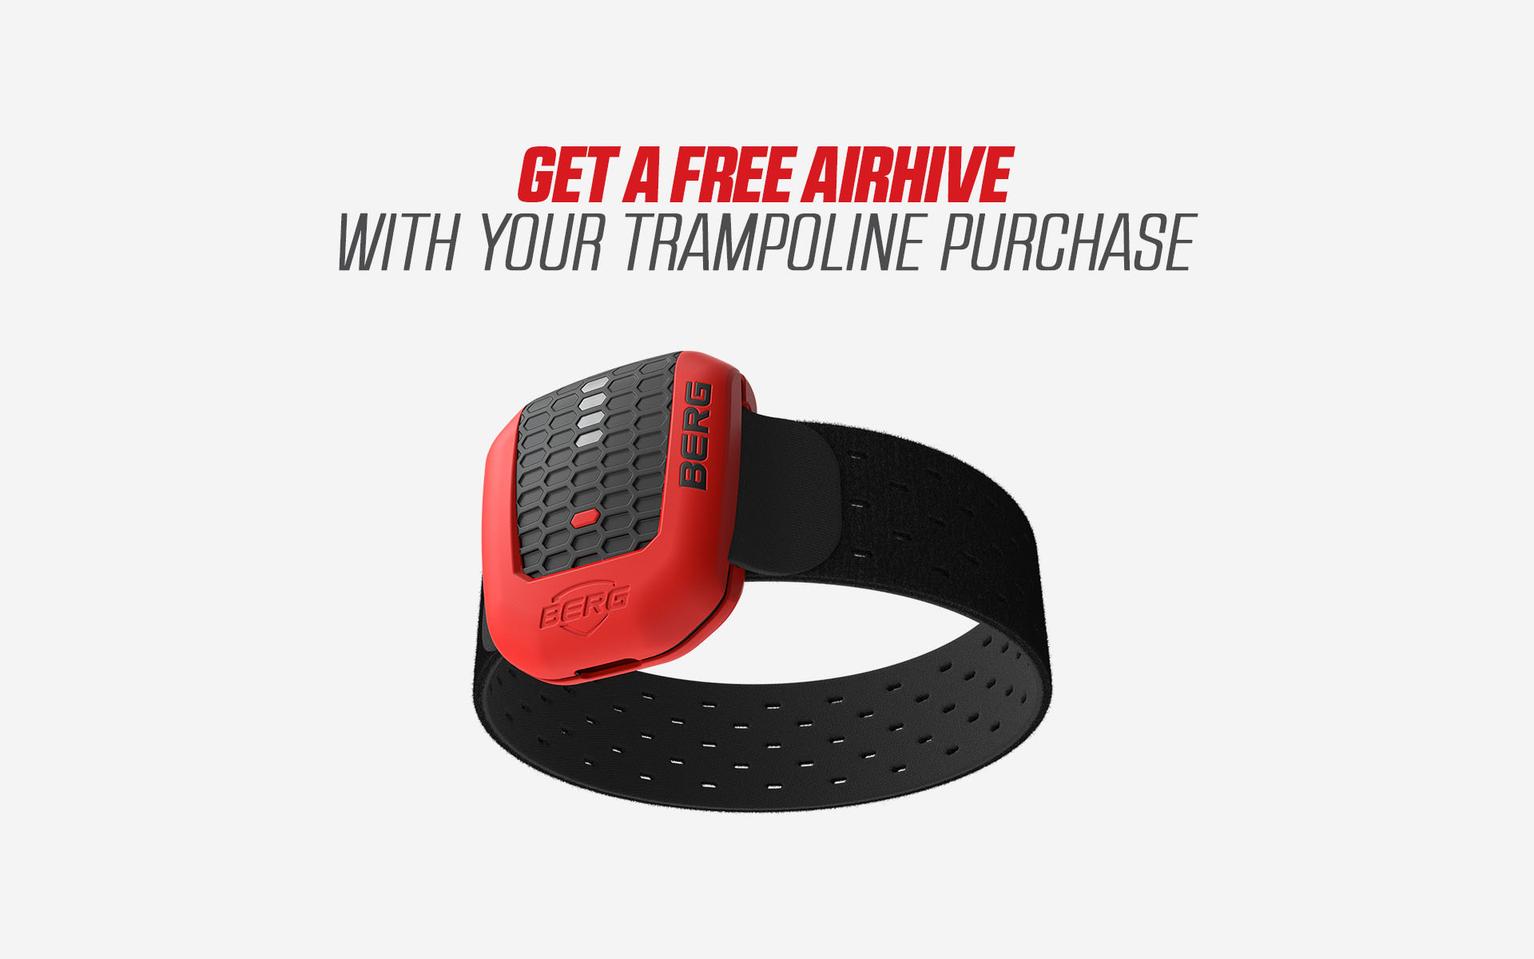 Get a free AirHive with your trampoline purchase 